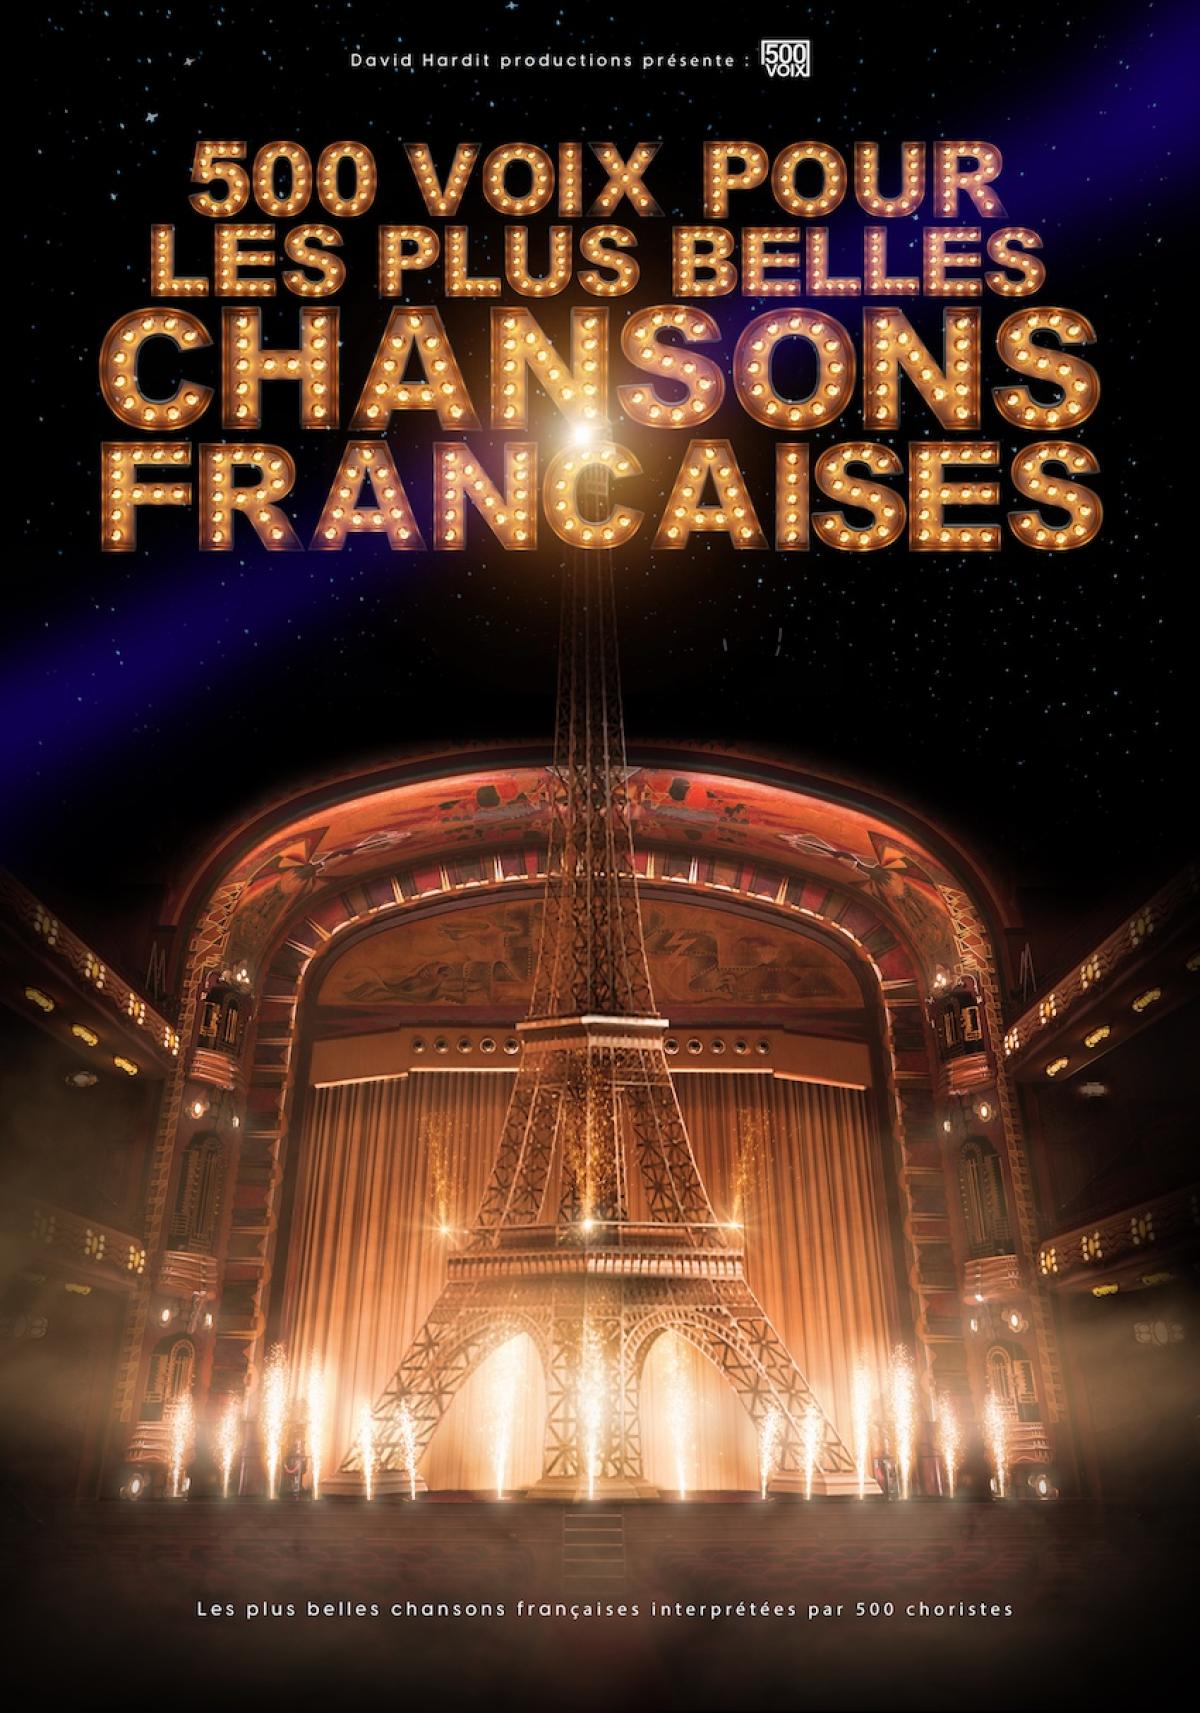 Billets 500 Voix Pour Les Plus Belles Chansons (Le Phare Chambery - Chambery)